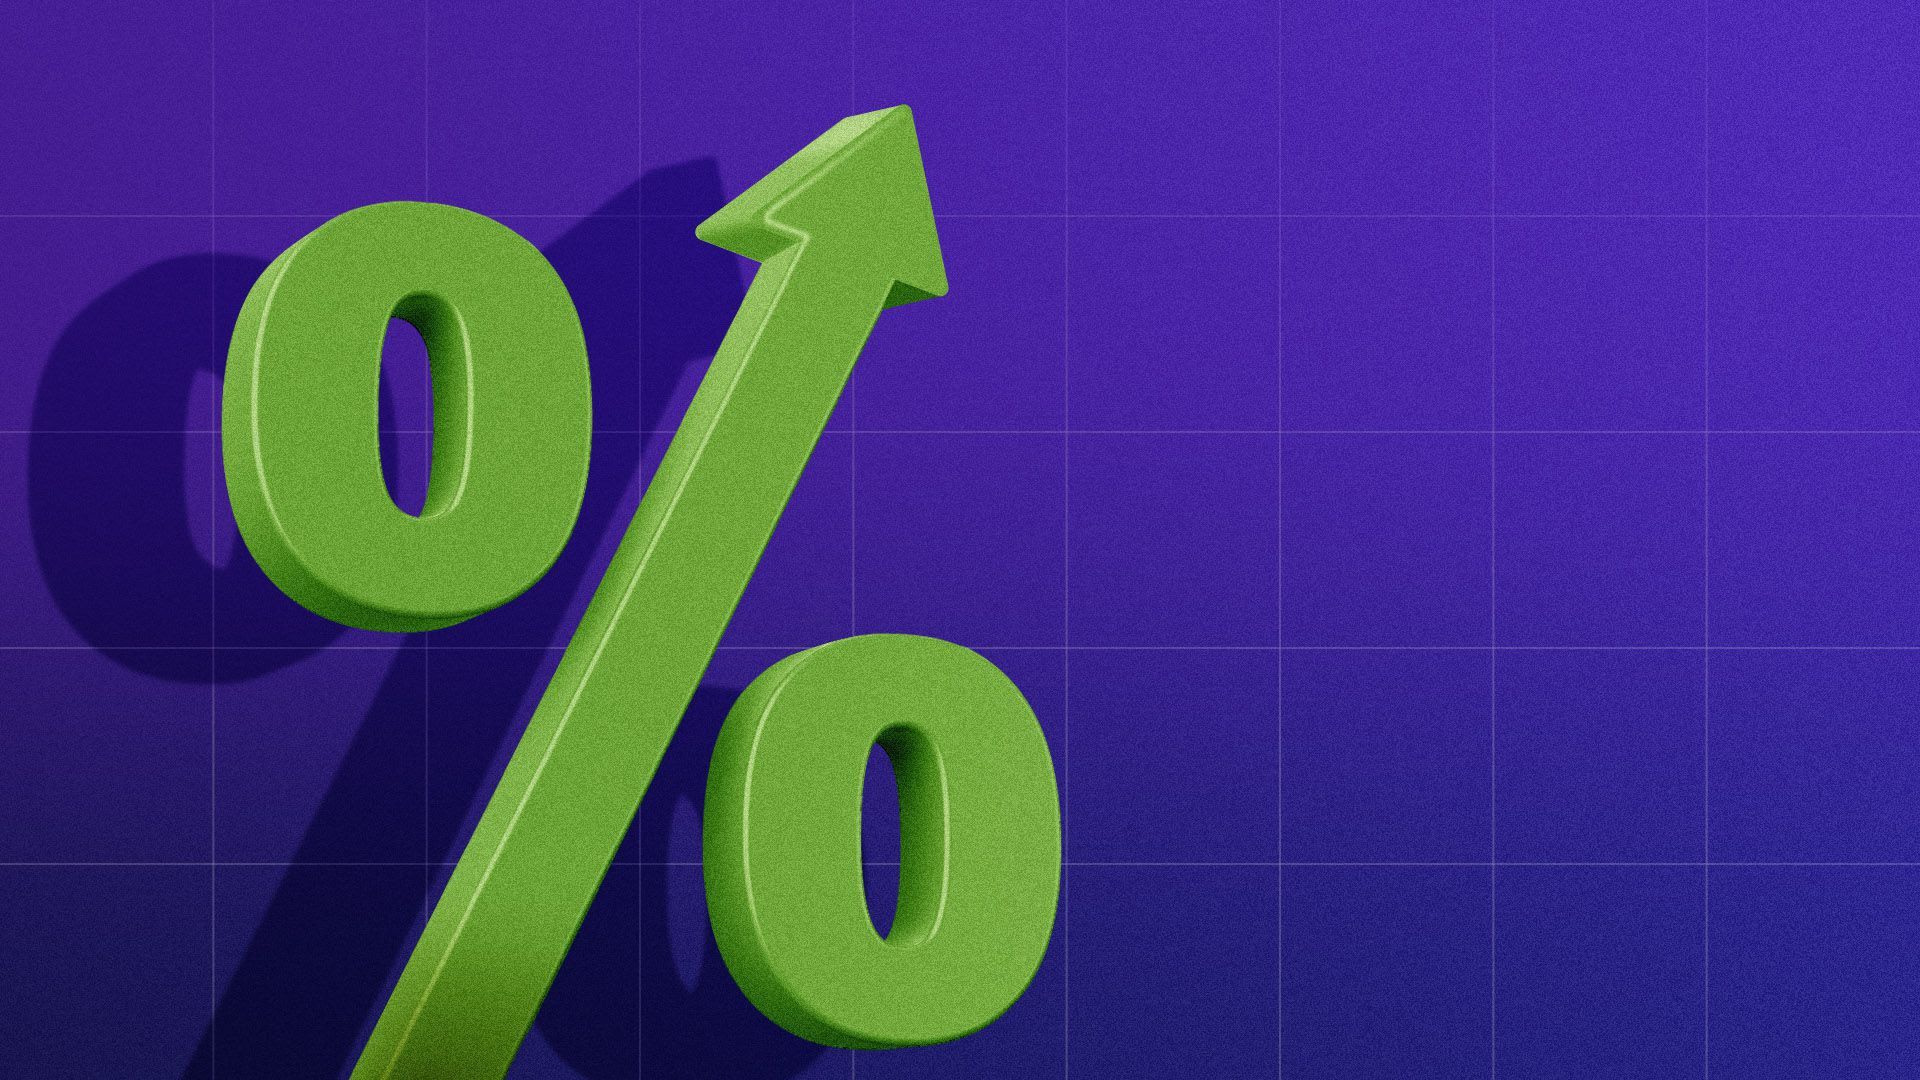 Illustration of a percentage sign pointing up.